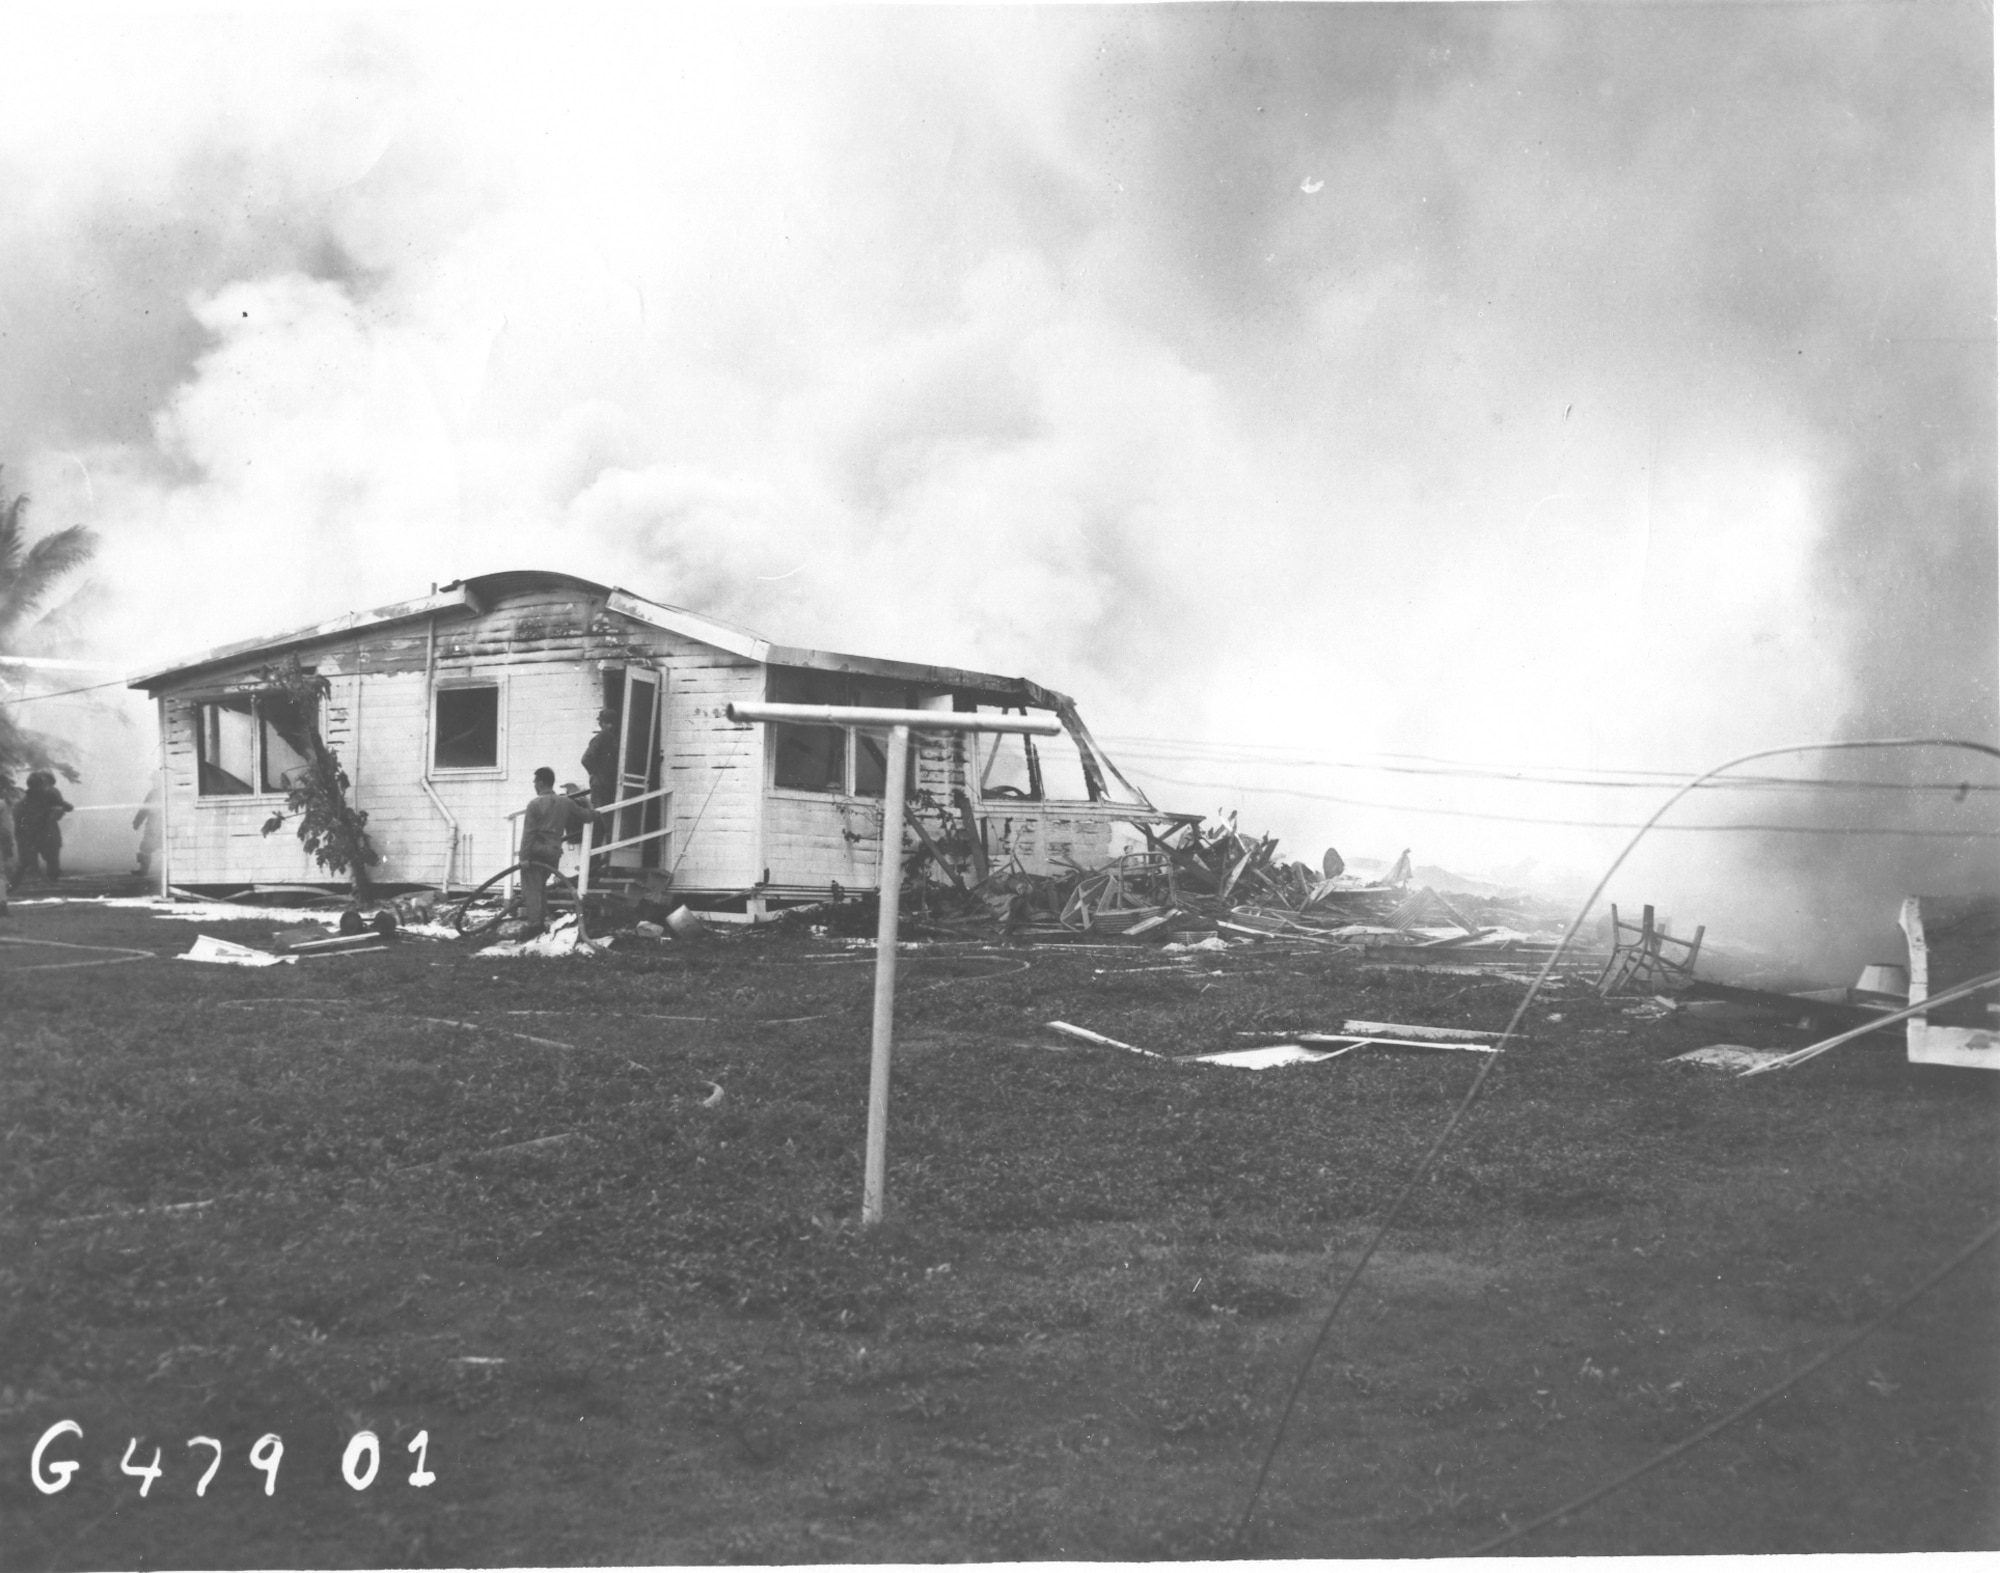 Lt Col. Benjamin L. Mills’ home burns after a B-29 Liberator crashed into it on Andersen Air Force Base, Guam Dec. 17, Mills, the 3rd Aviation Field Depot Squadron commander, his wife Agnes, and three daughters Margaret, Helen, and Martha were all killed in the crash. (U.S. Air Force phot/Released)